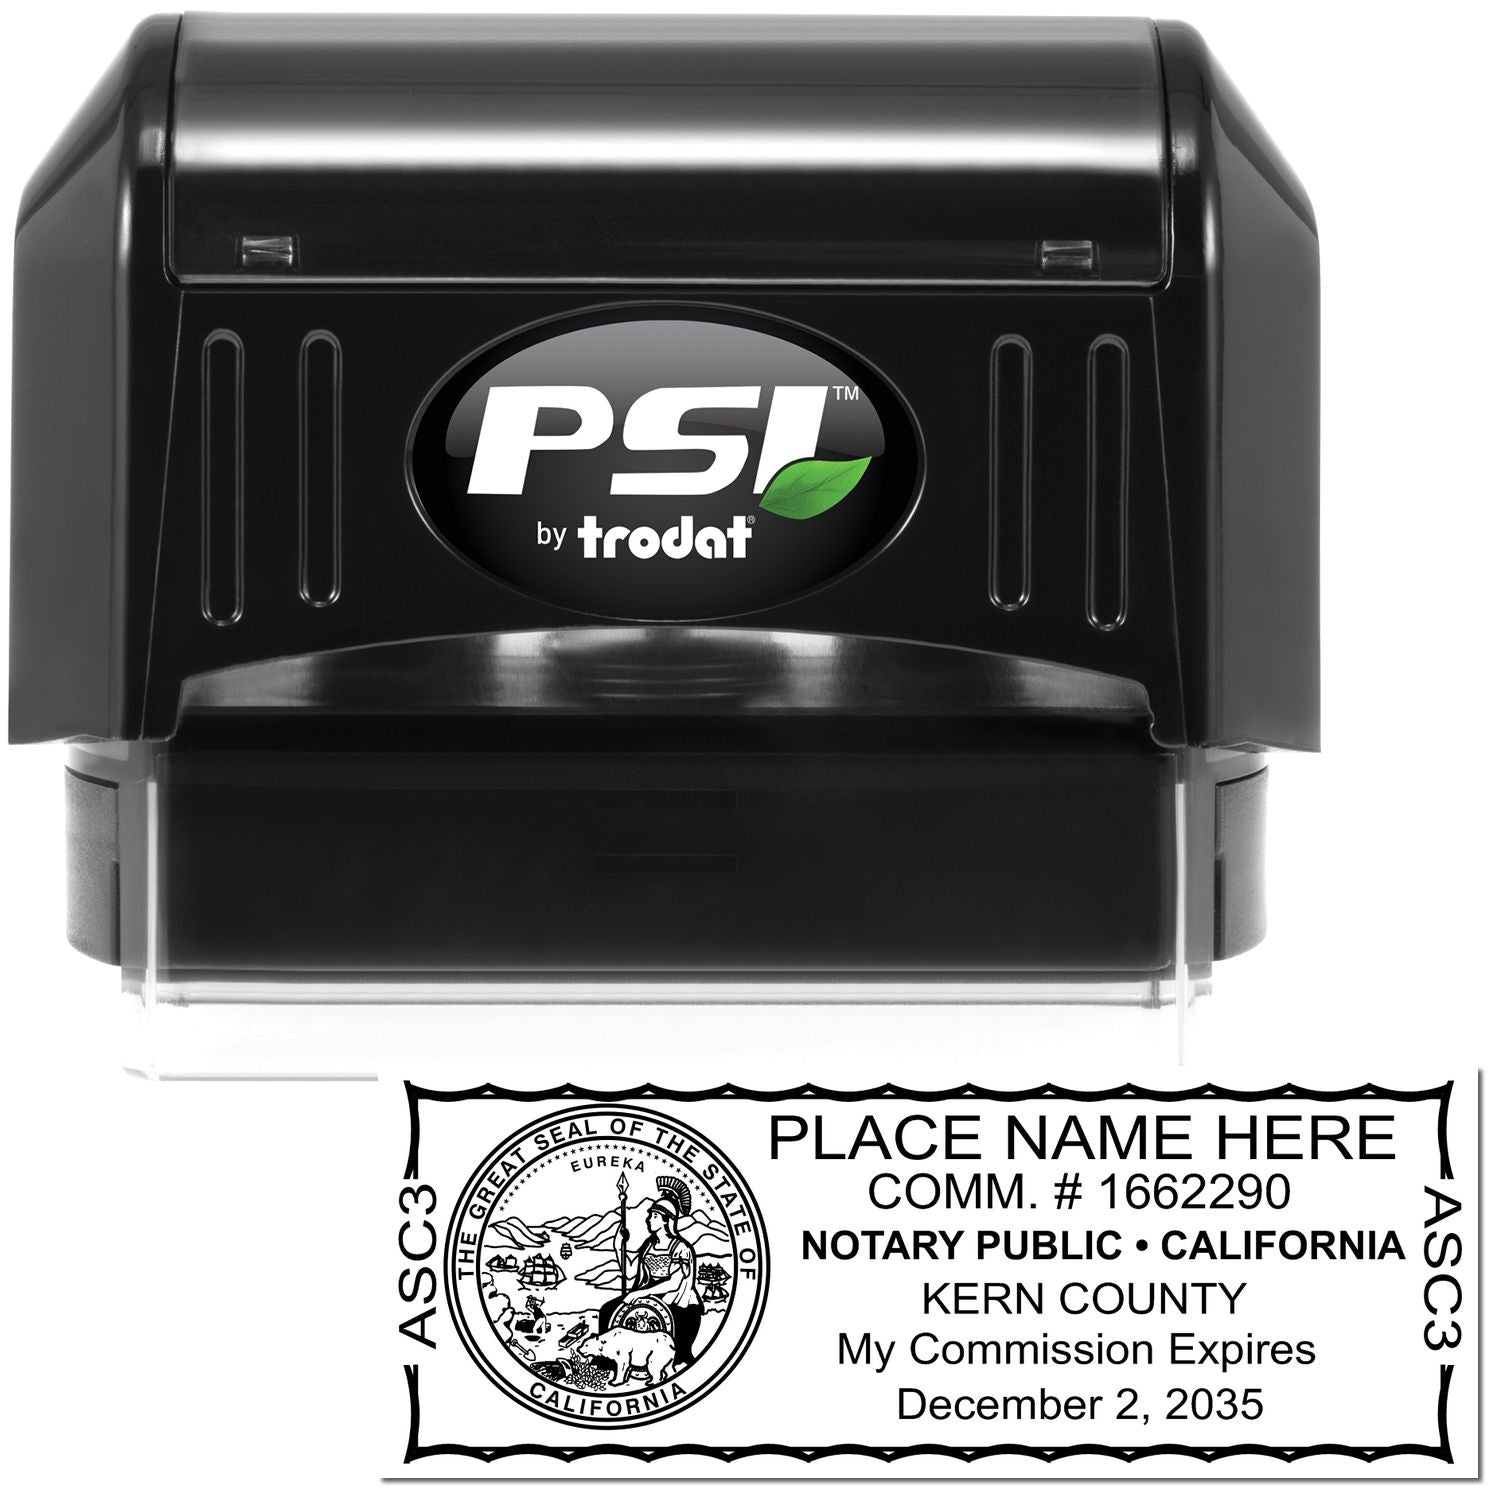 The main image for the PSI California Notary Stamp depicting a sample of the imprint and electronic files